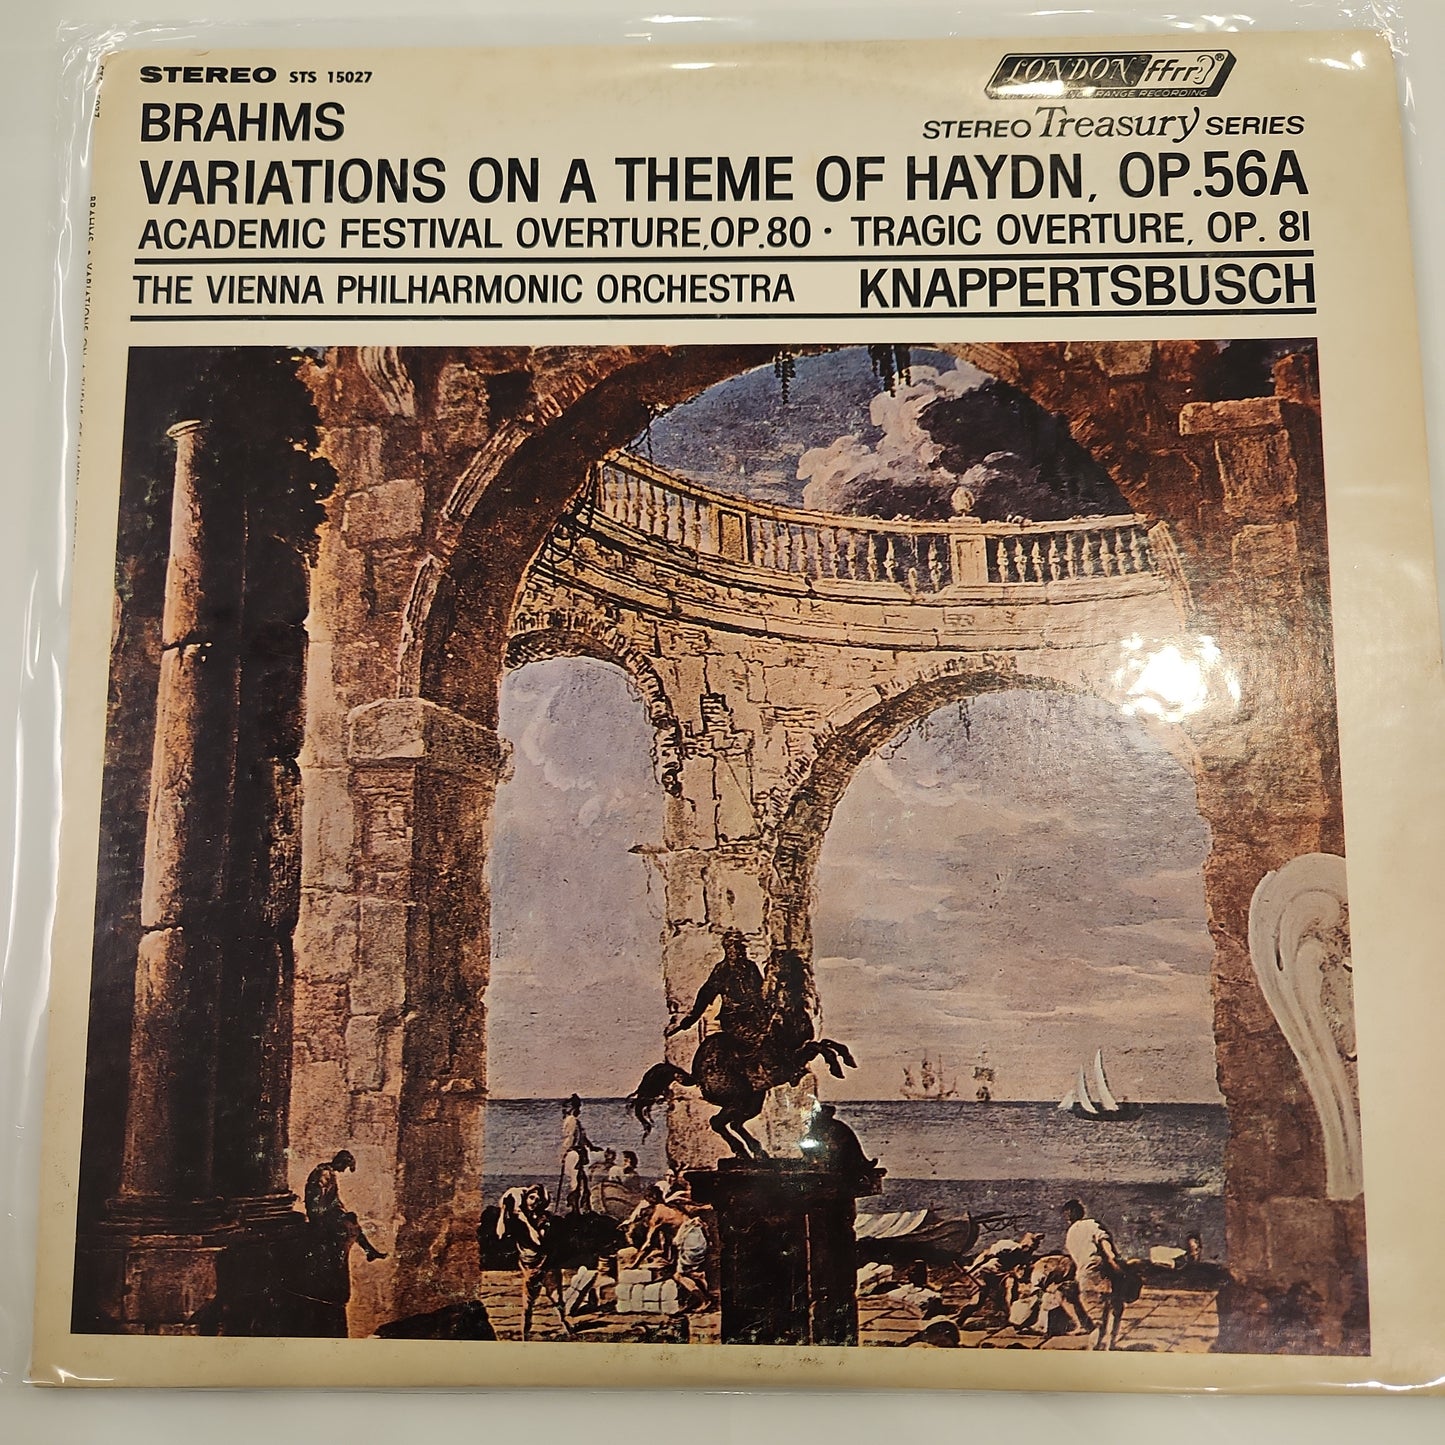 Brahms - Variations on a Theme of Haydn